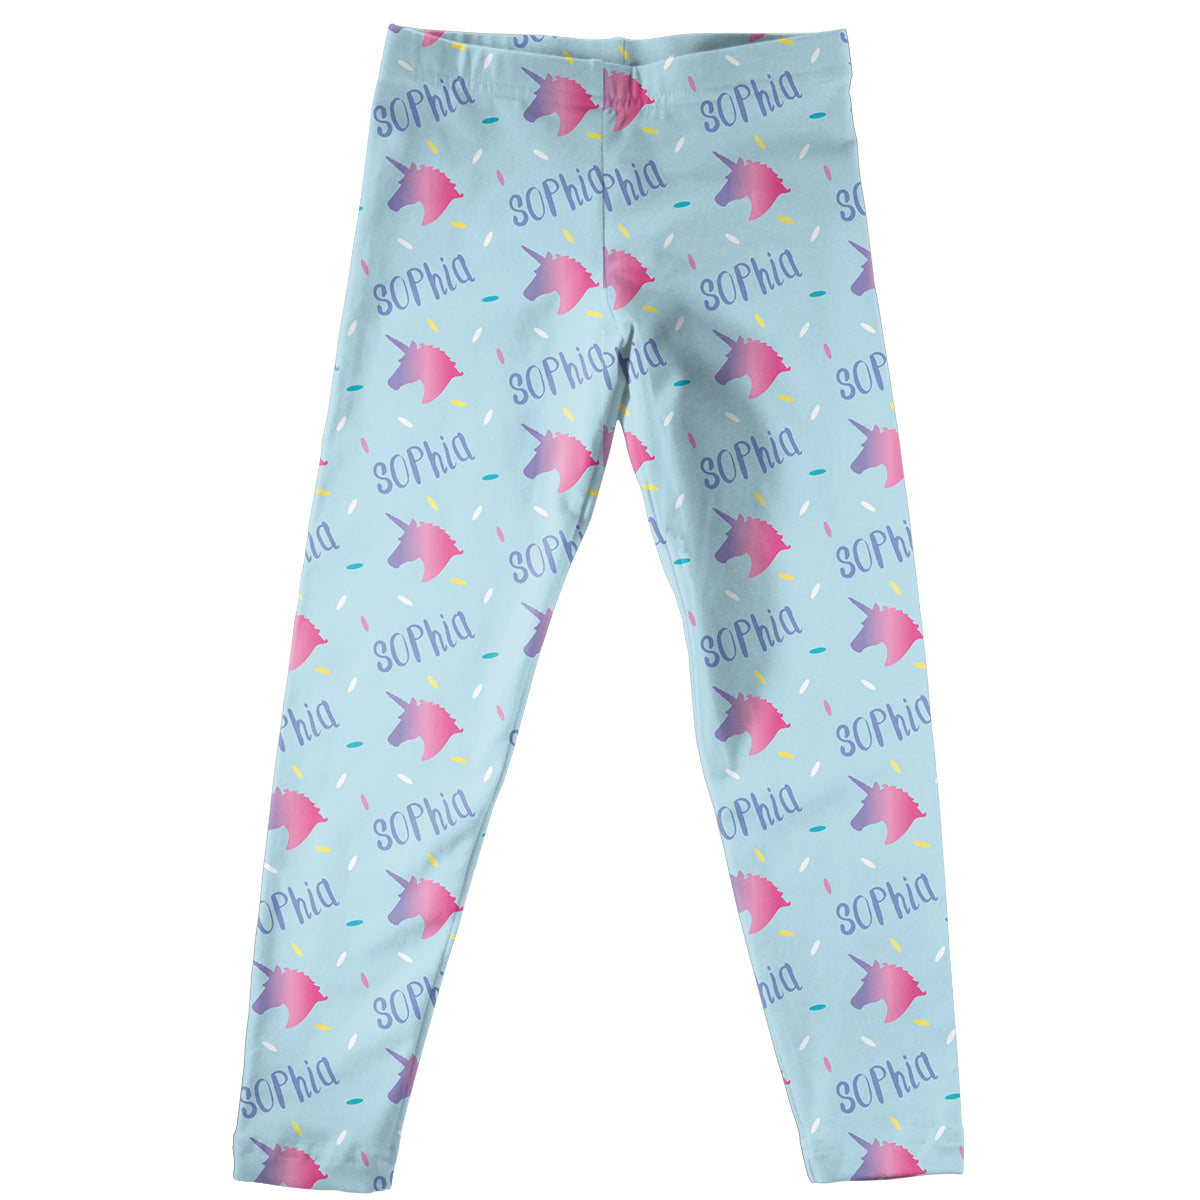 Light blue and pink unicorns girls leggings with name - Wimziy&Co.